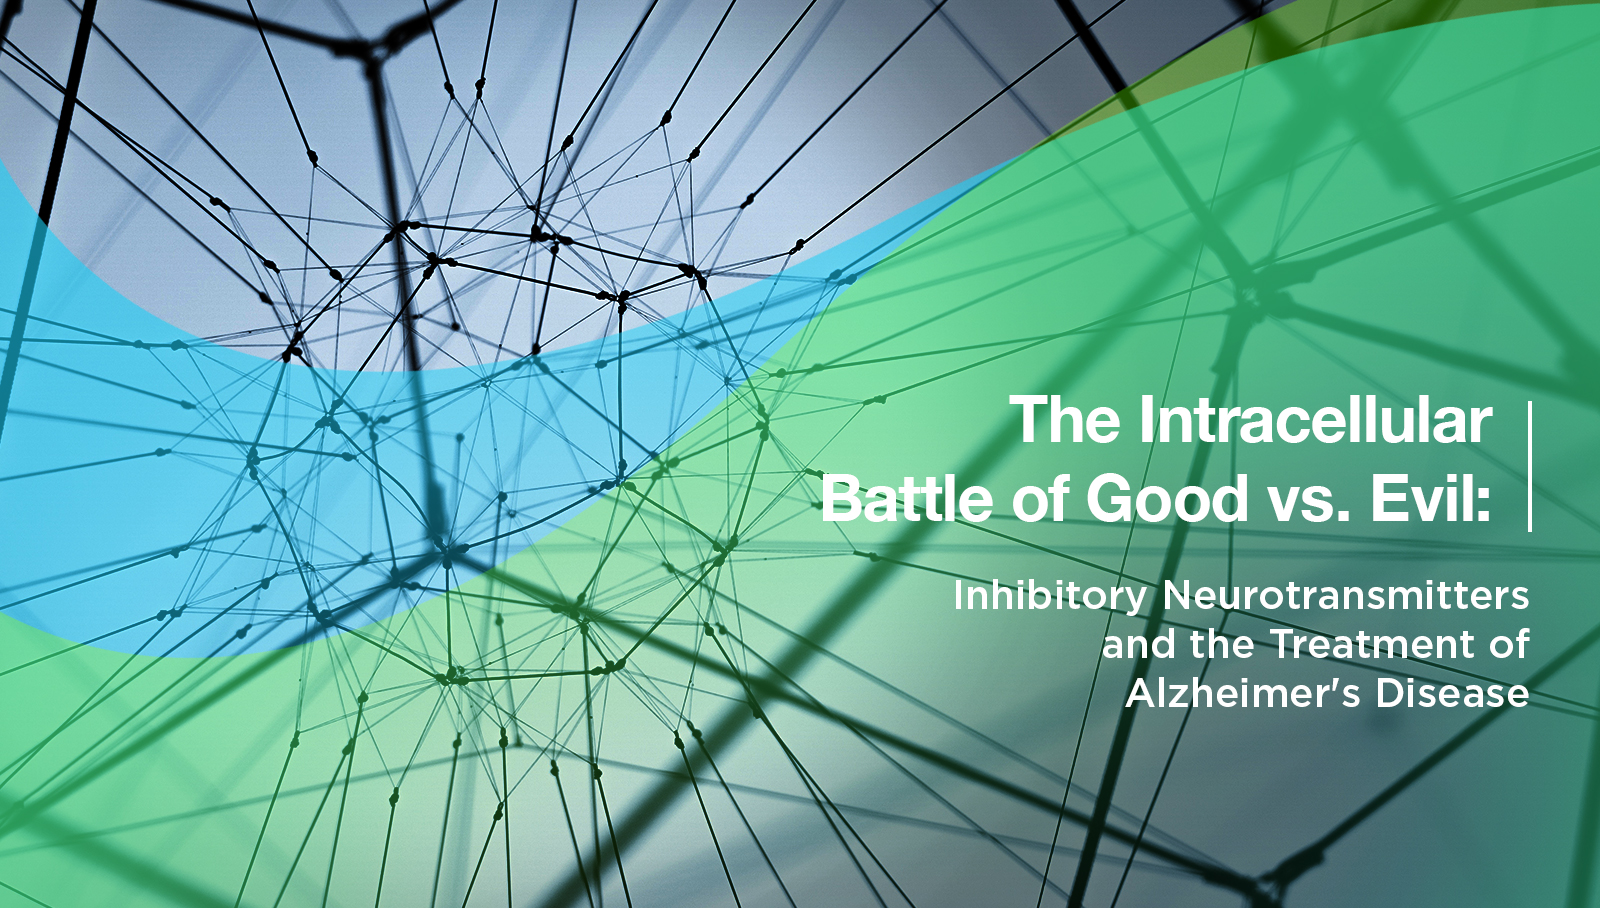 The Intracellular Battle of Good vs. Evil: Inhibitory Neurotransmitters and the Treatment of Alzheimer’s Disease